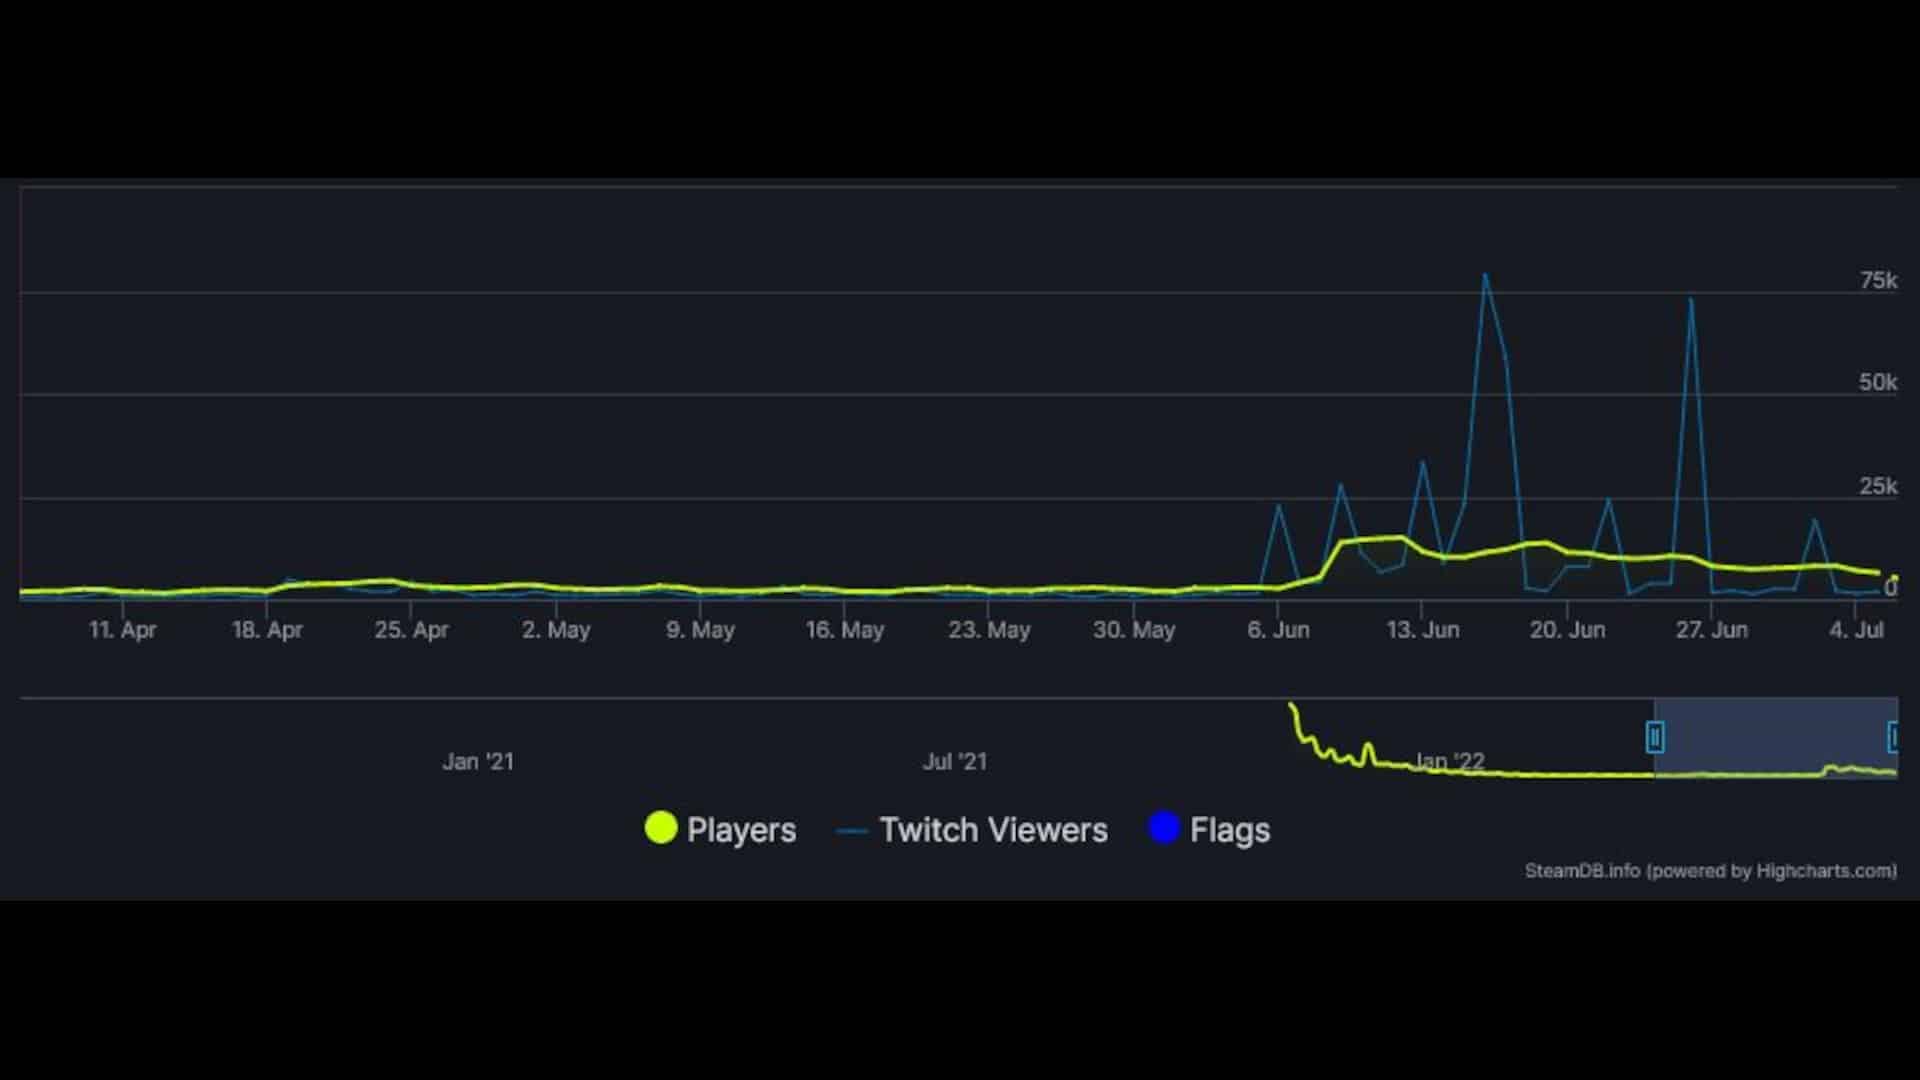 (A look at SteamDB shows: Battlefield needs to do more to really come back)